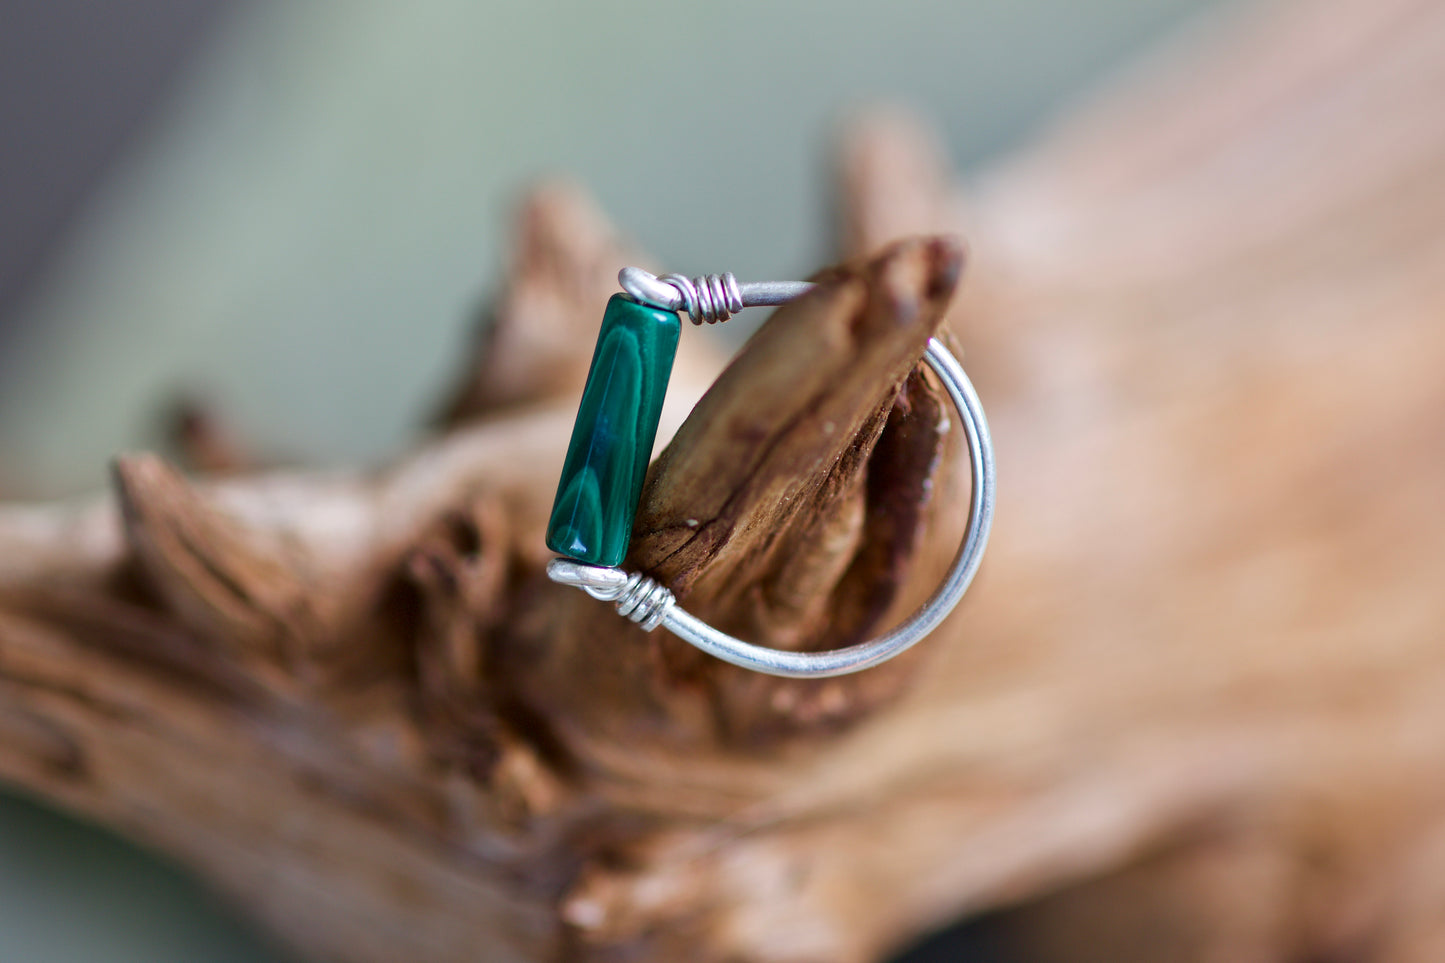 Malachite and Sterling Silver Wire Ring, size 7-7.25